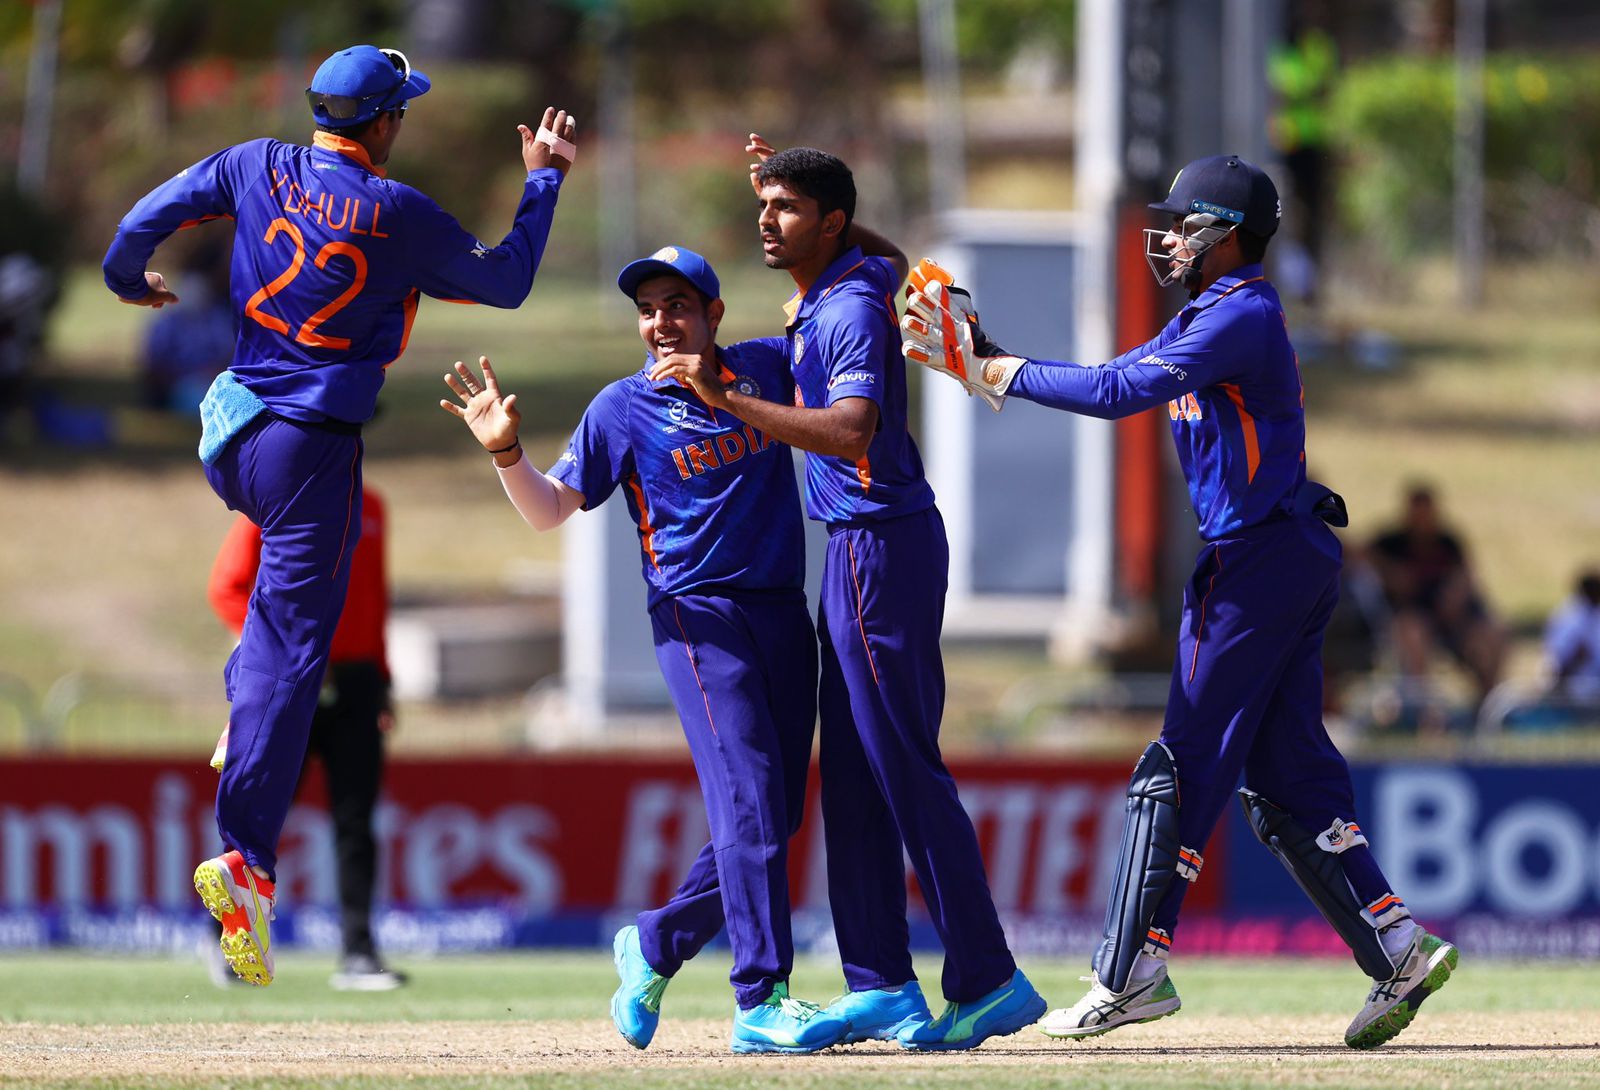 U19 World Cup Finals Everything you need to know about India vs